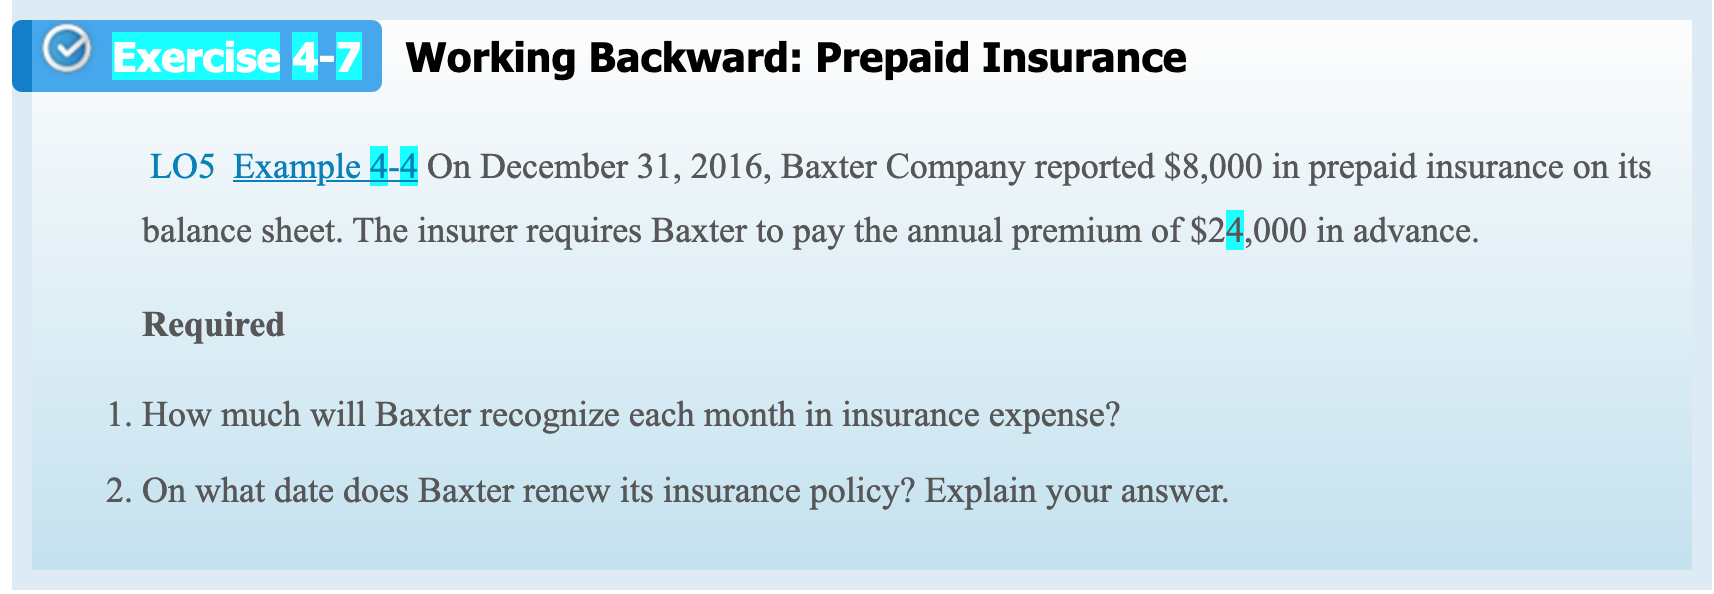 LO5 Example 4-4 On December 31, 2016, Baxter Company reported $8,000 in prepaid insurance on its
balance sheet. The insurer requires Baxter to pay the annual premium of $24,000 in advance.
Required
1. How much will Baxter recognize each month in insurance expense?
2. On what date does Baxter renew its insurance policy? Explain your answer.
